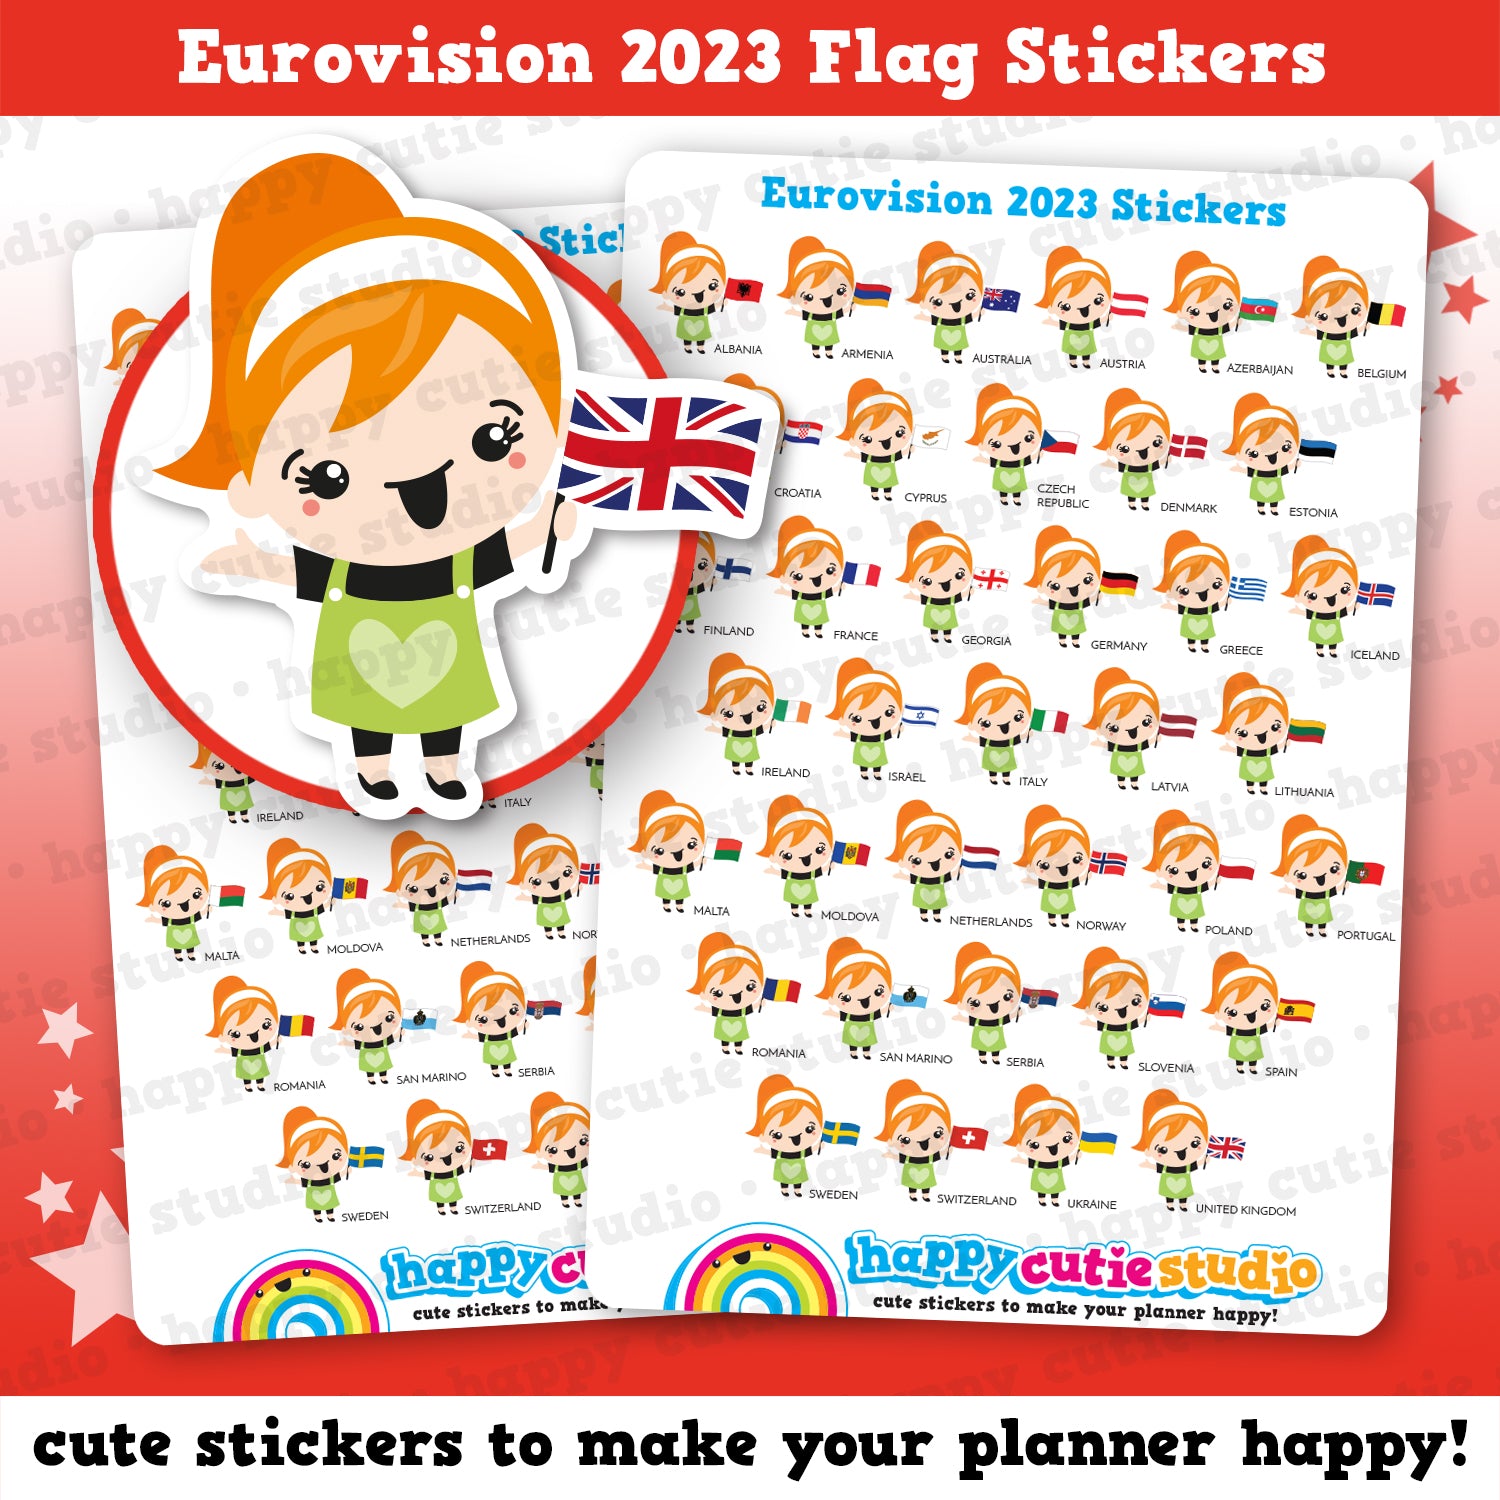 37 Cute Eurovision Song Contest 2023 Planner Stickers